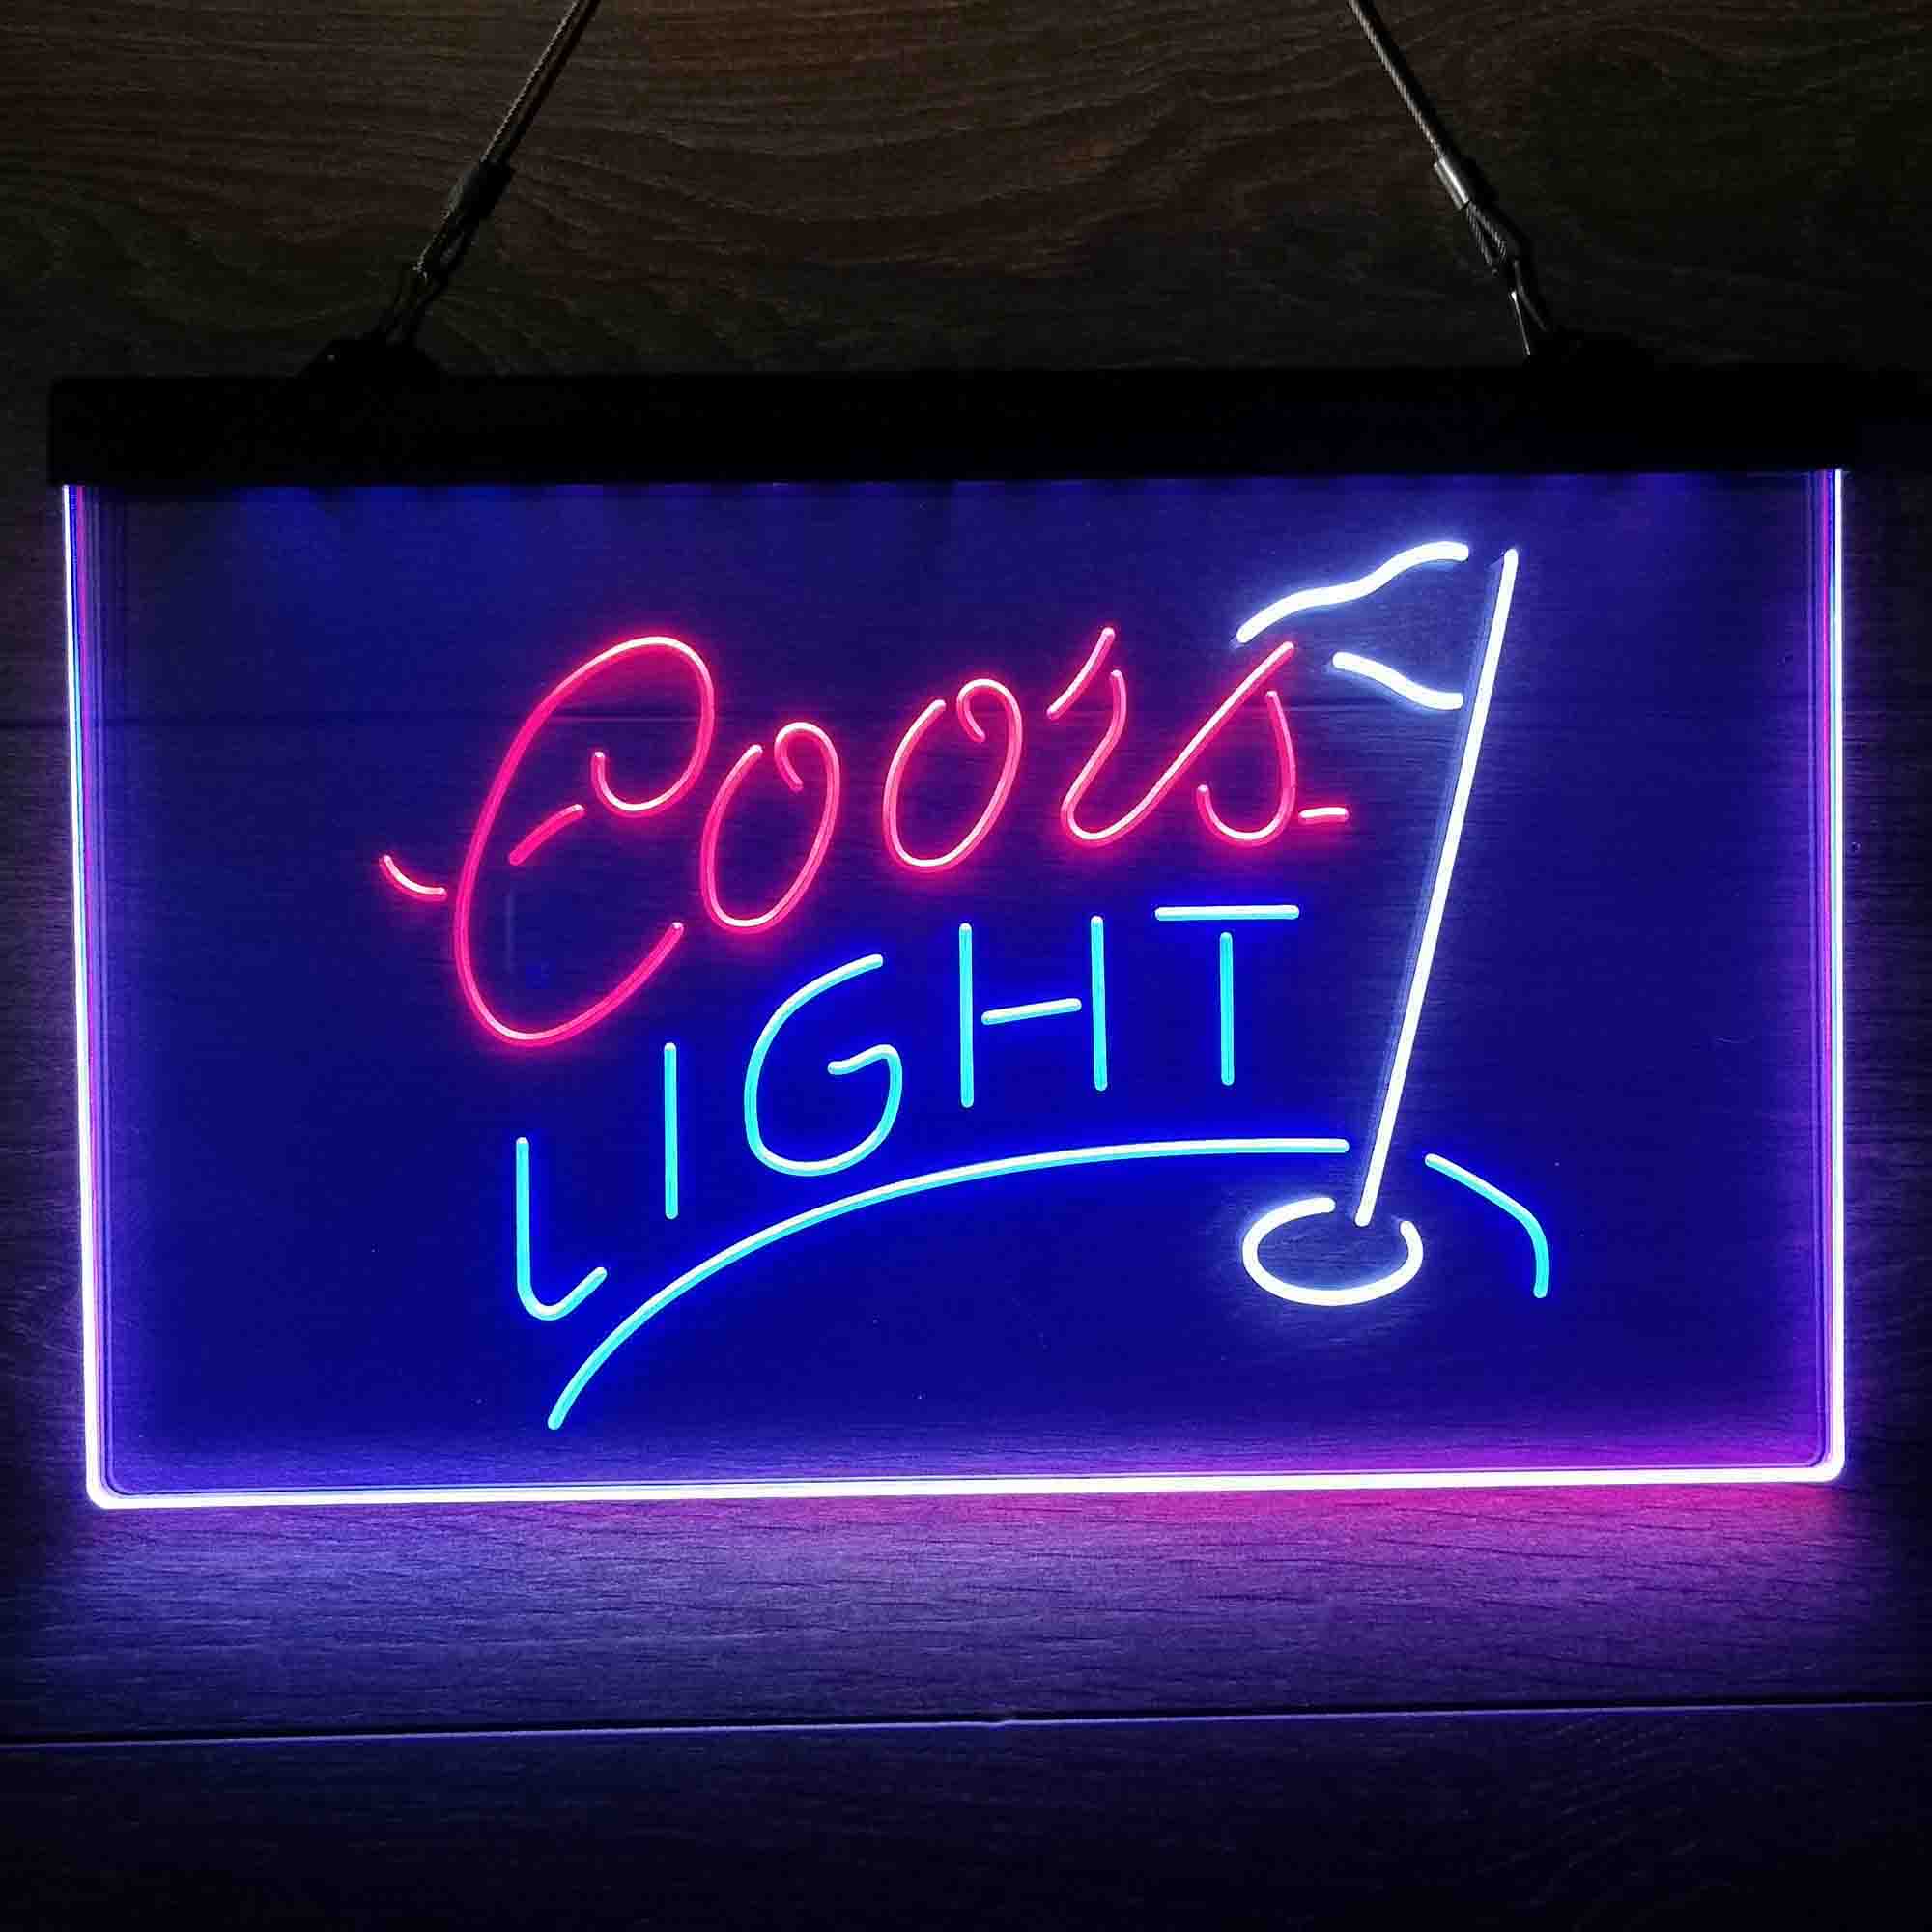 Coors Light Golf Neon 3-Color LED Sign Neon 3-Color LED Sign